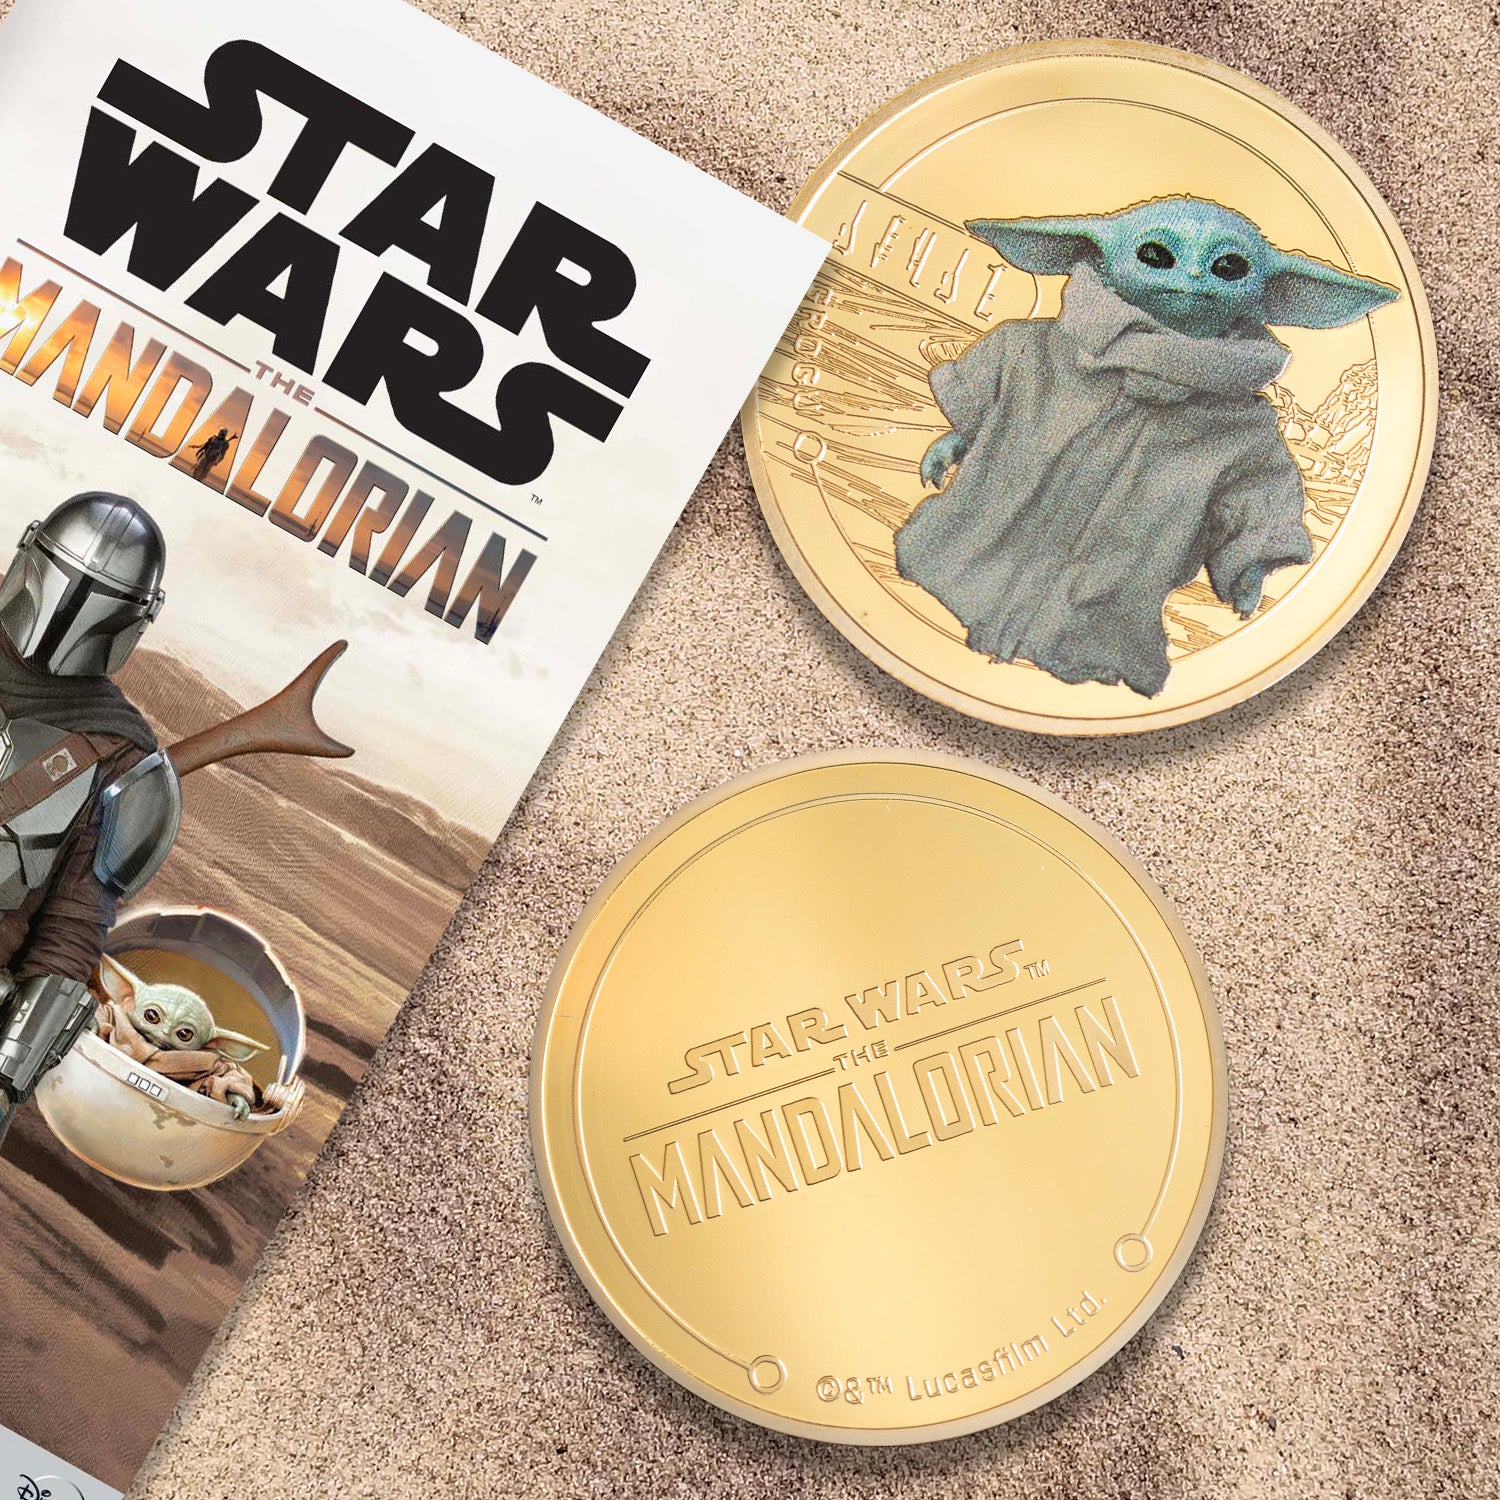 The Official Star Wars Mandalorian Gold Commemorative Collection